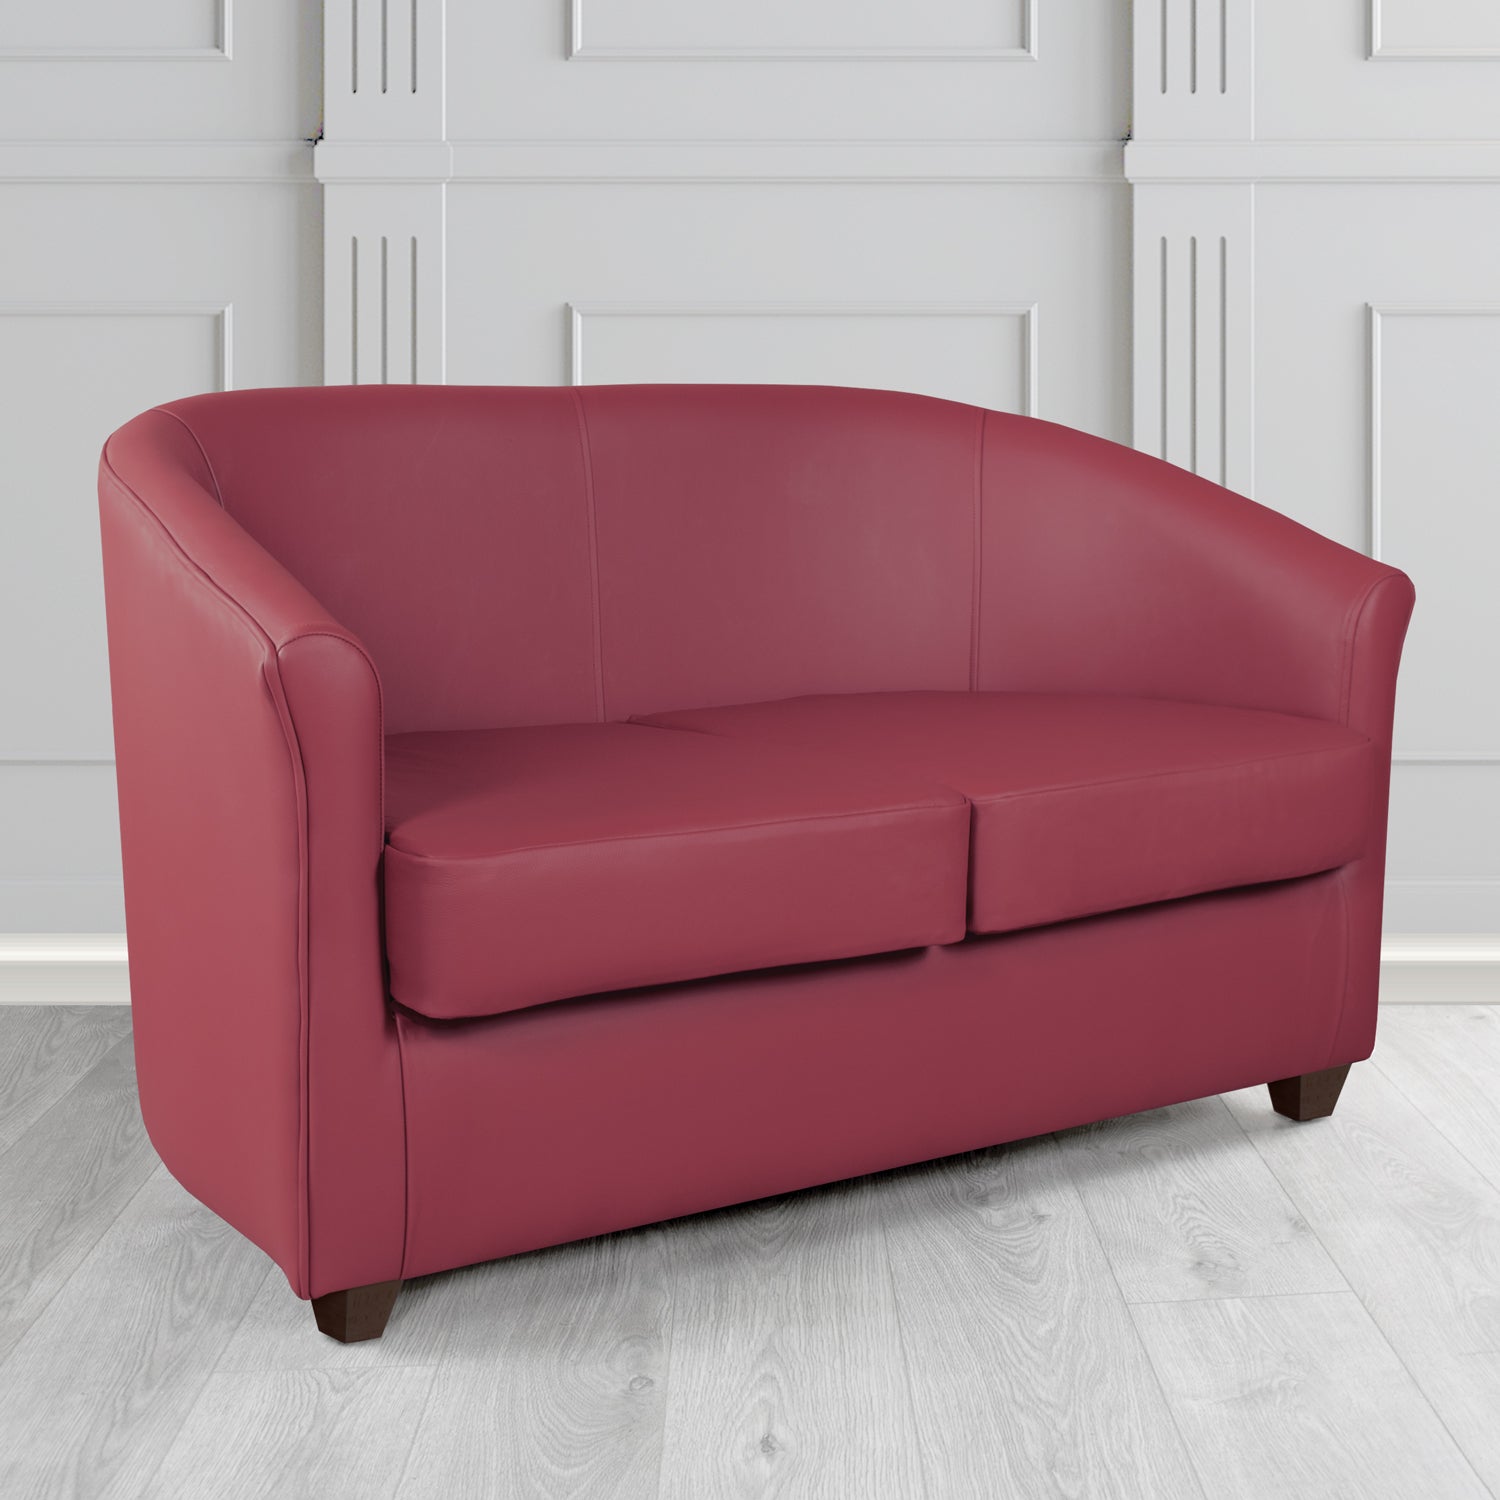 Cannes 2 Seater Tub Sofa in Just Colour Jazzberry Crib 5 Faux Leather - The Tub Chair Shop